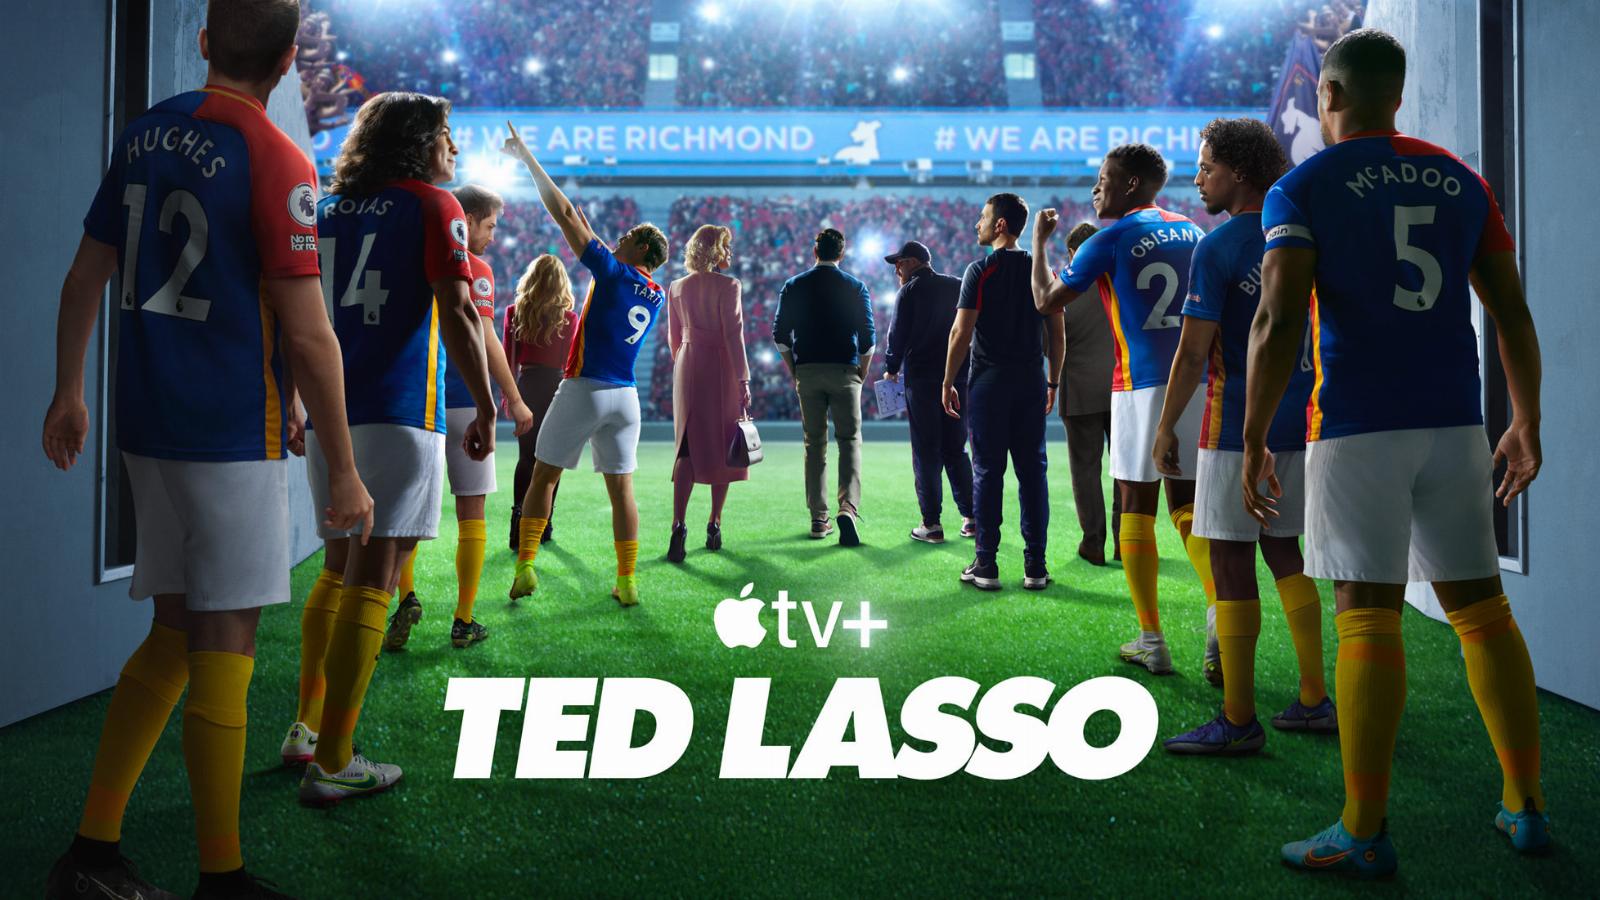 Season 3 of ‘Ted Lasso’ will premiere on Apple TV+ on March 15